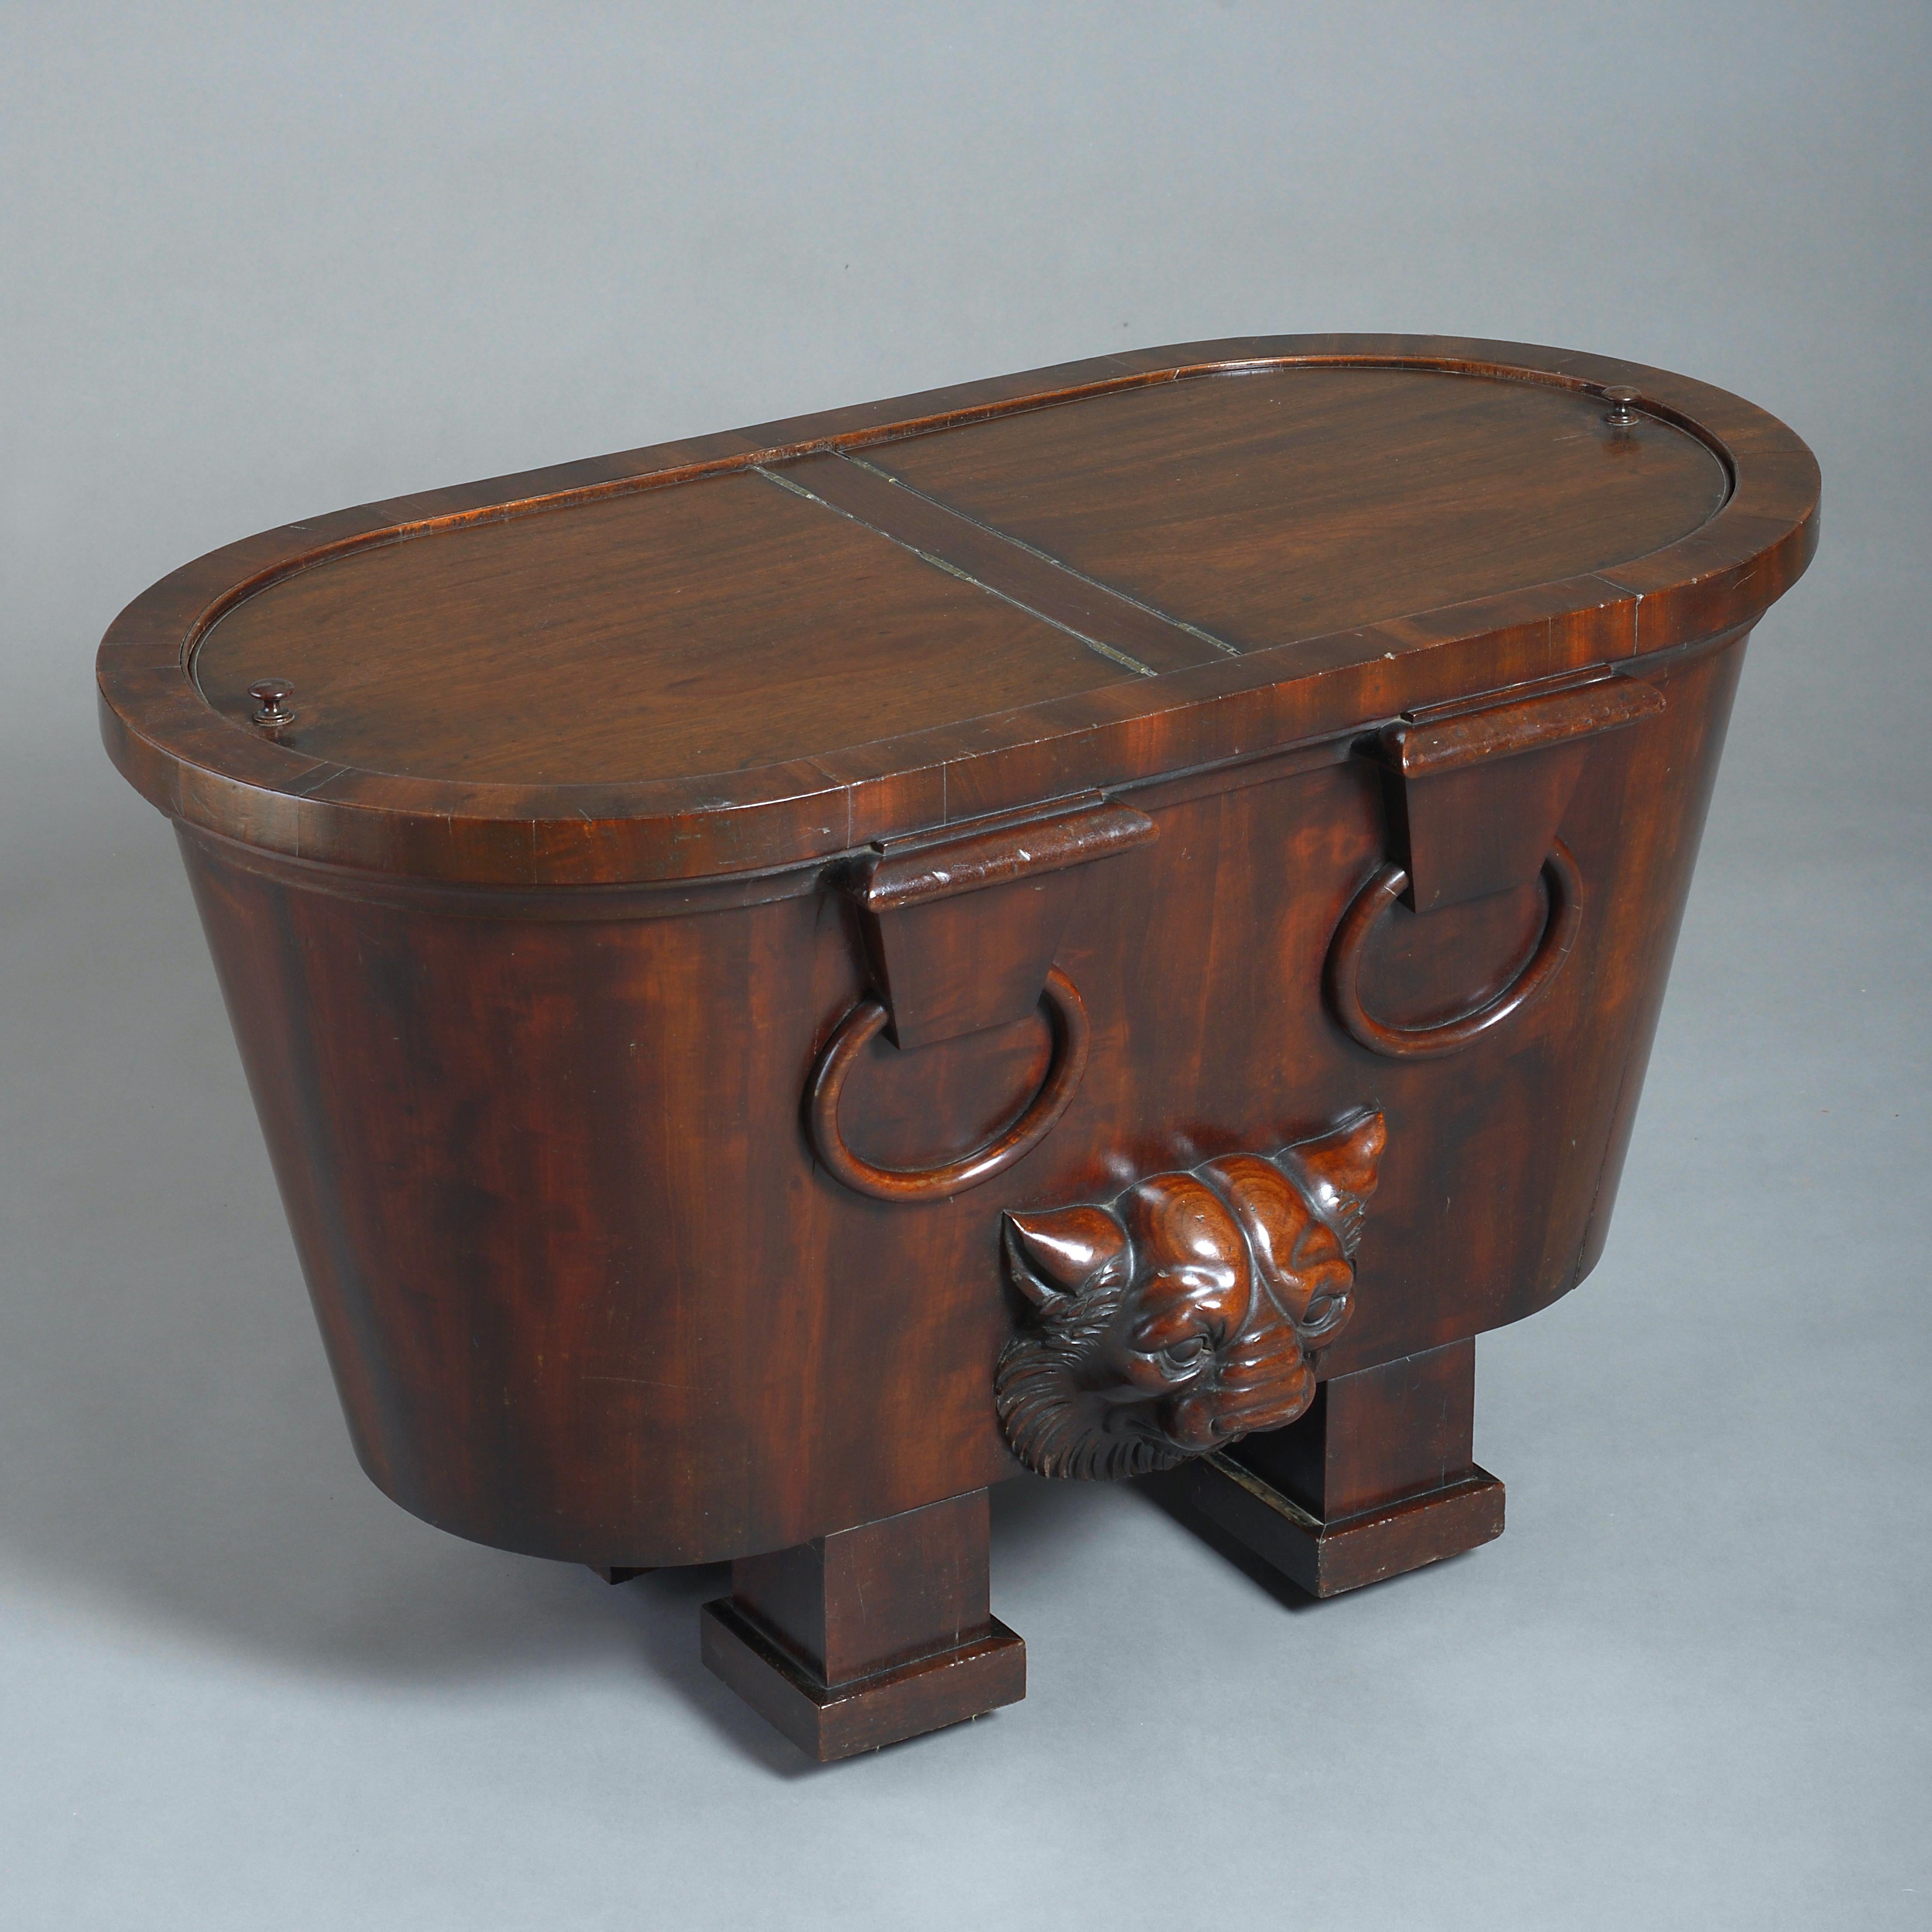 AN IMPORTANT REGENCY MAHOGANY WINE-COOLER AFTER A DESIGN BY THOMAS HOPE, CIRCA 1805.

The design for this wine-cooler can be found on plate XXIV of Thomas Hope’s seminal Household Furniture and Interior Decoration published in 1807.

It is described